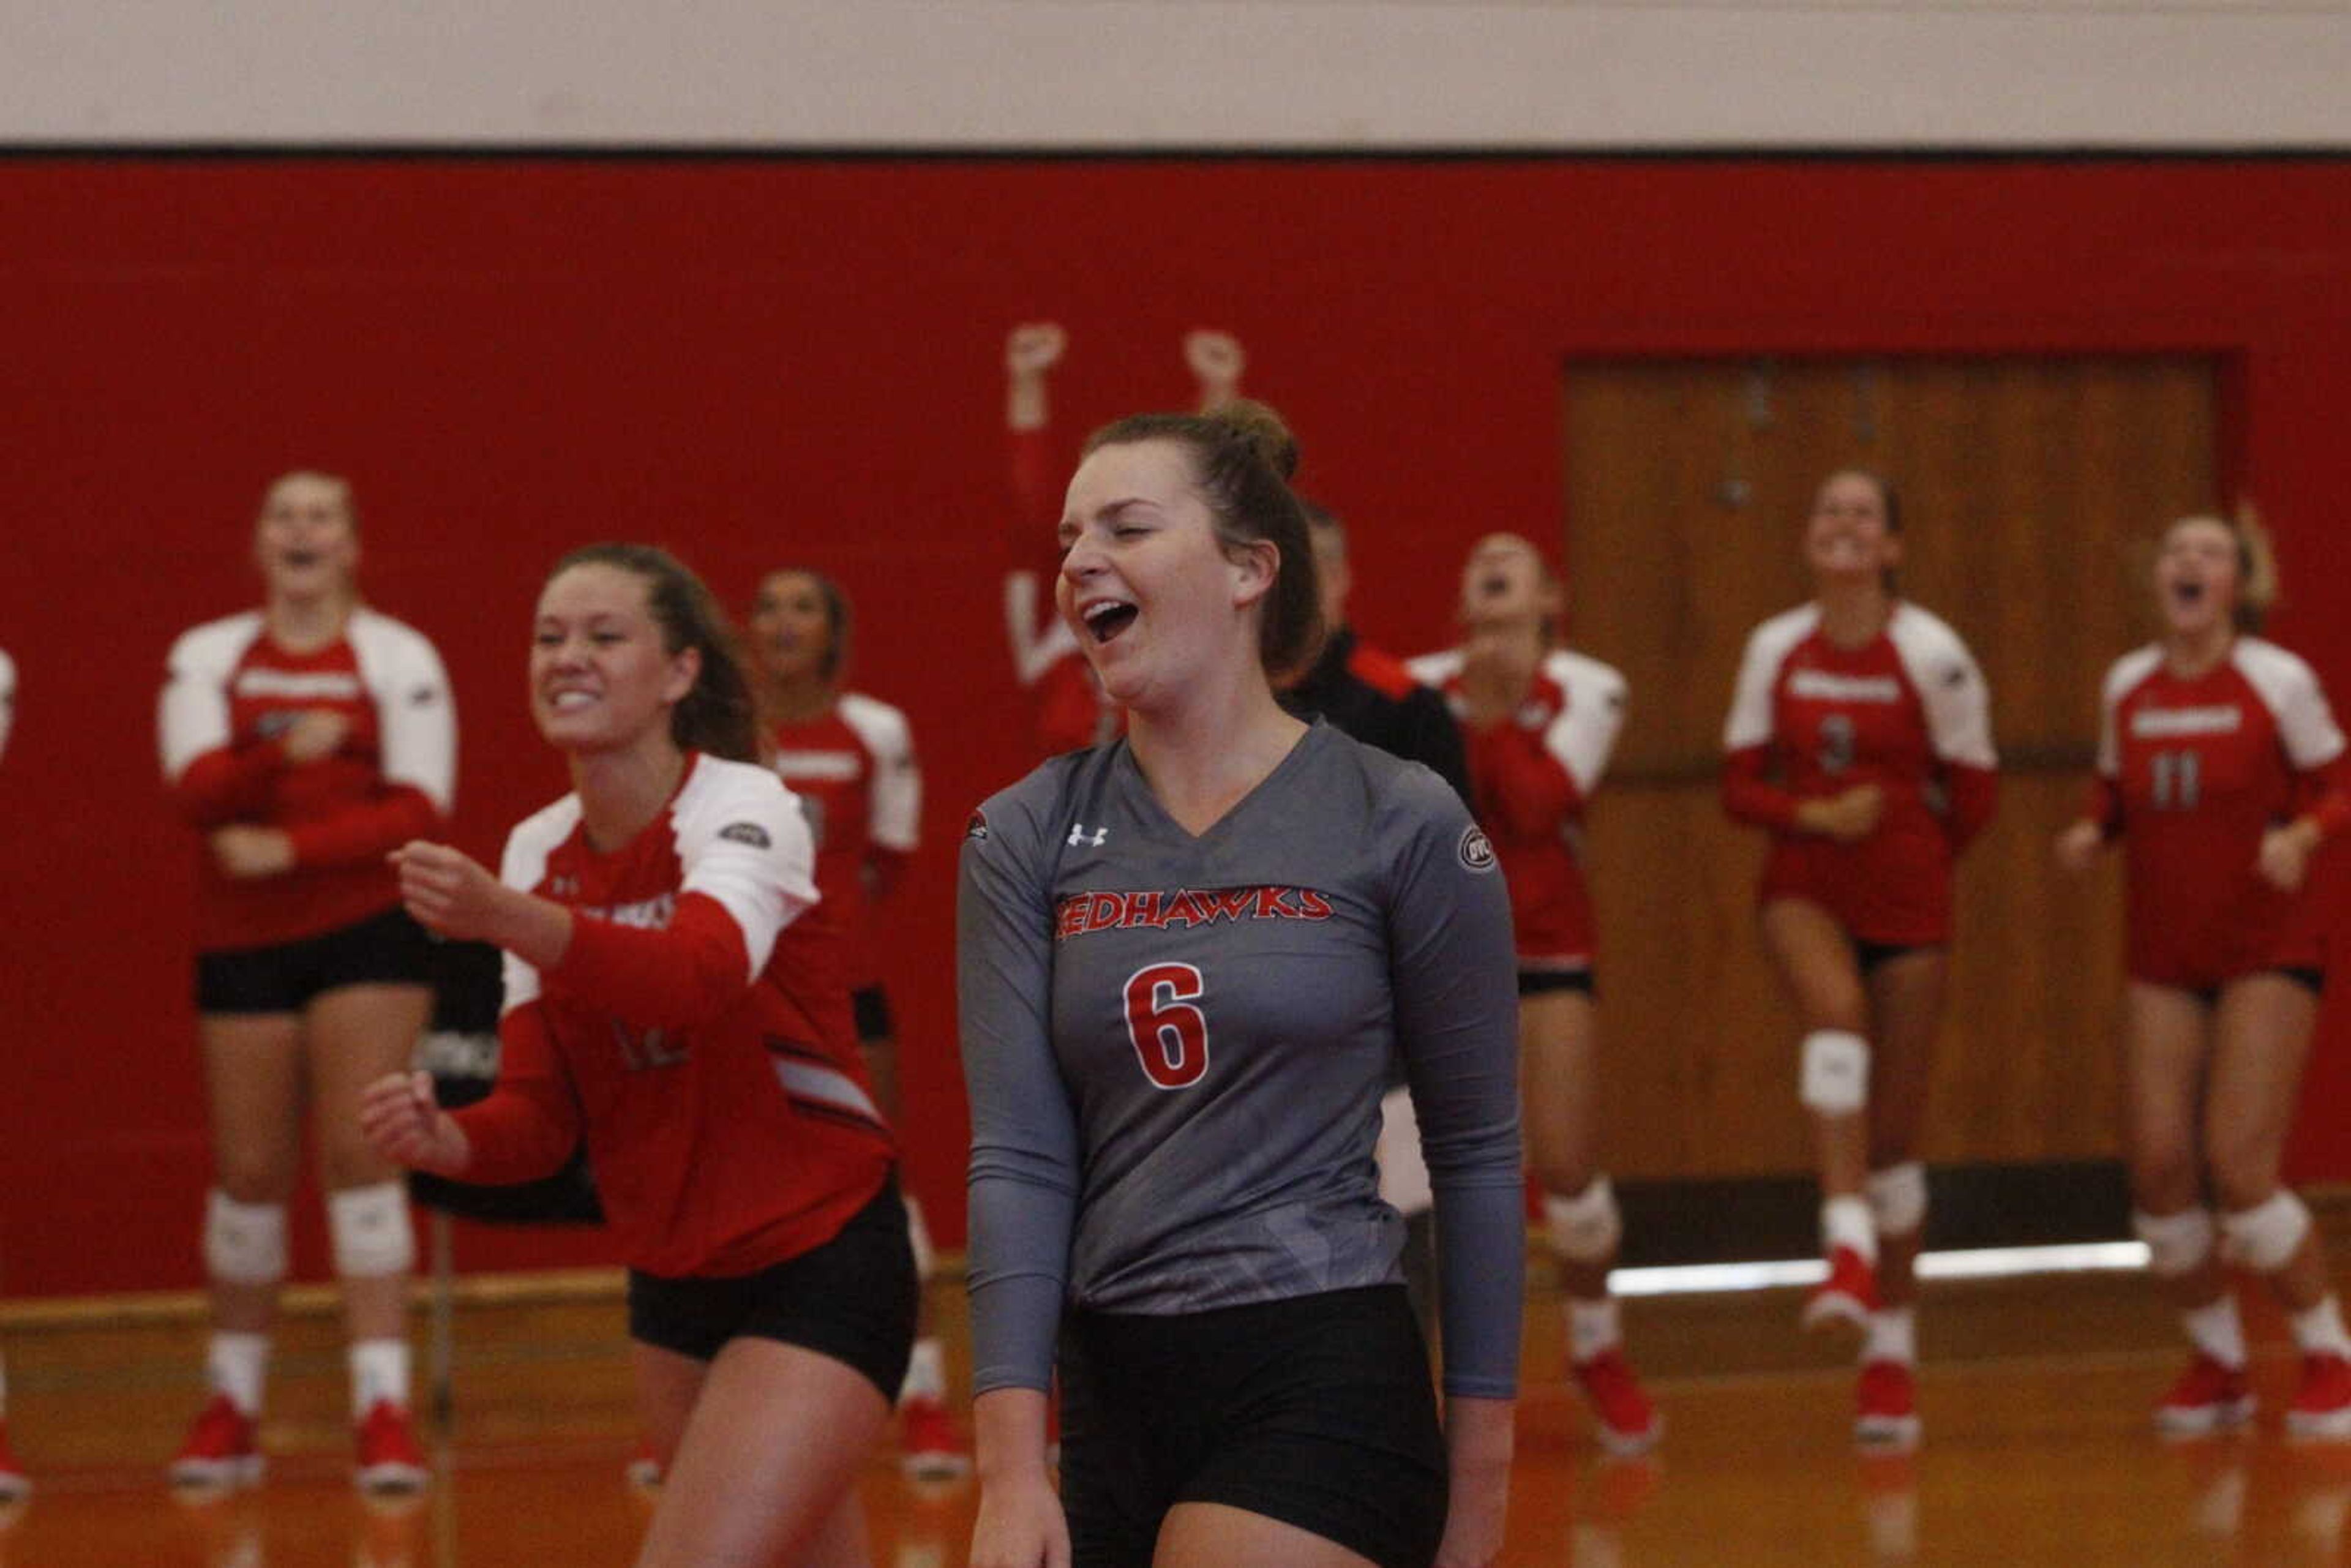 Sophomore defensive specialist Ally Dion, number six, and junior outside hitter Mikayla Kuhlmann celebrate after a Redhawks score during an exhibition match against Missouri Baptist.